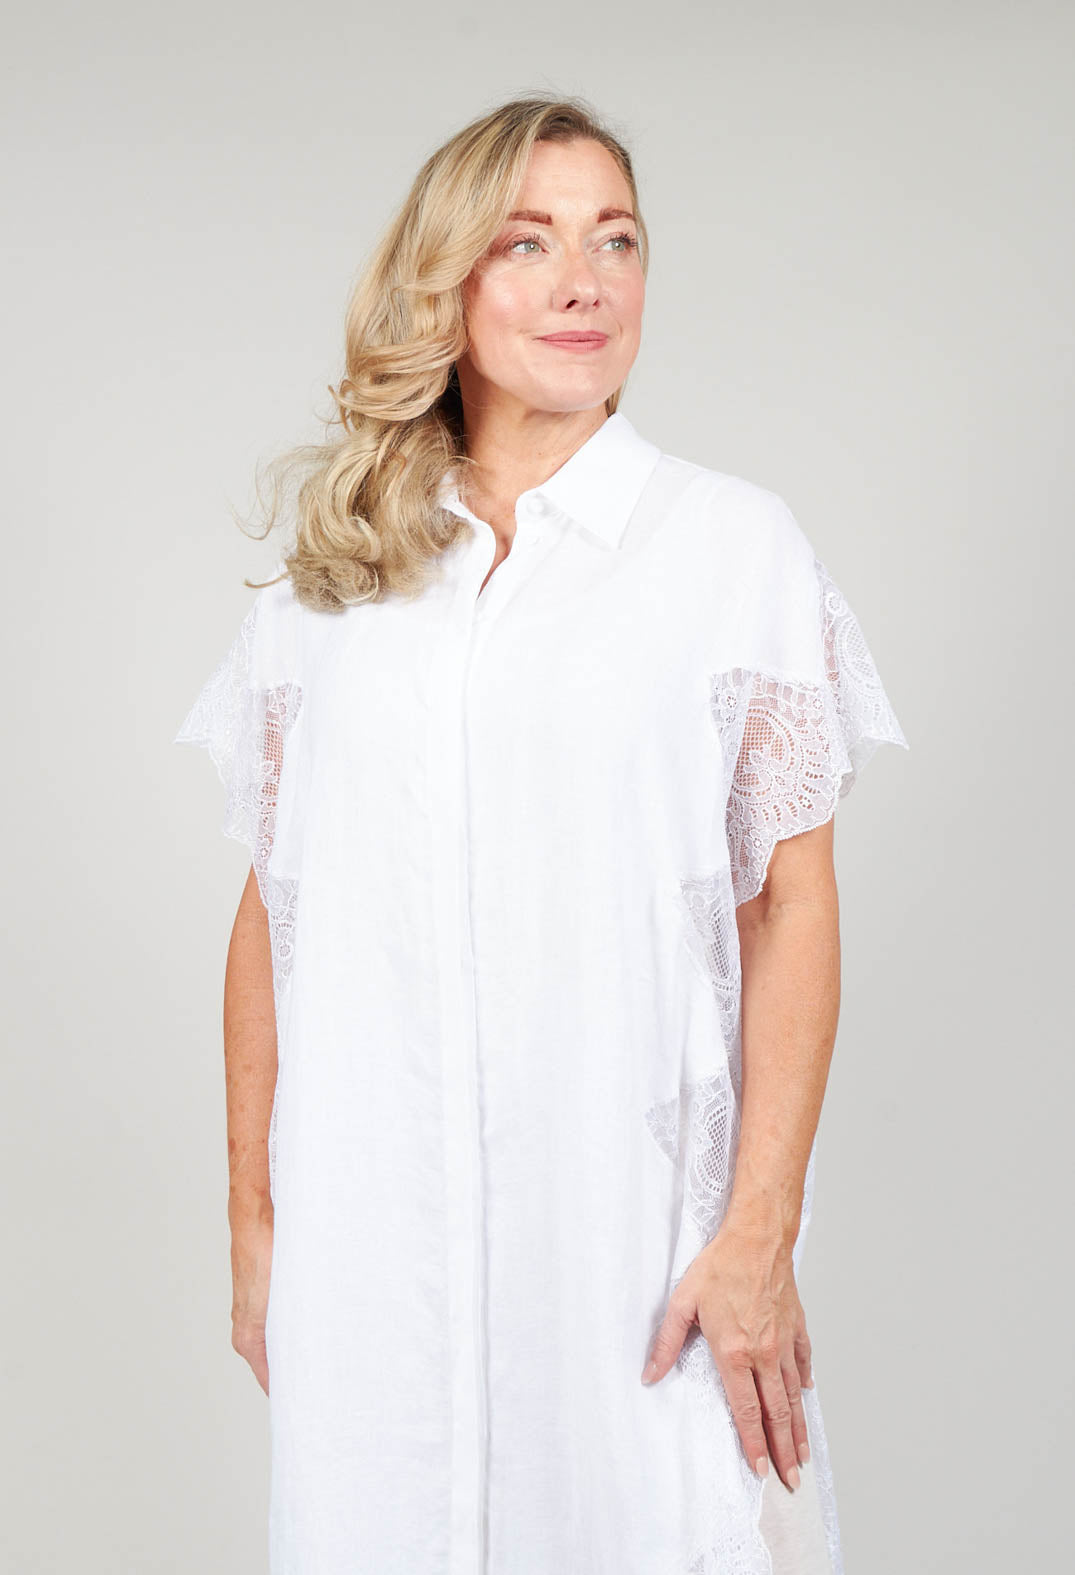 lady smiling whilst wearing the white shirt dress with lace detail